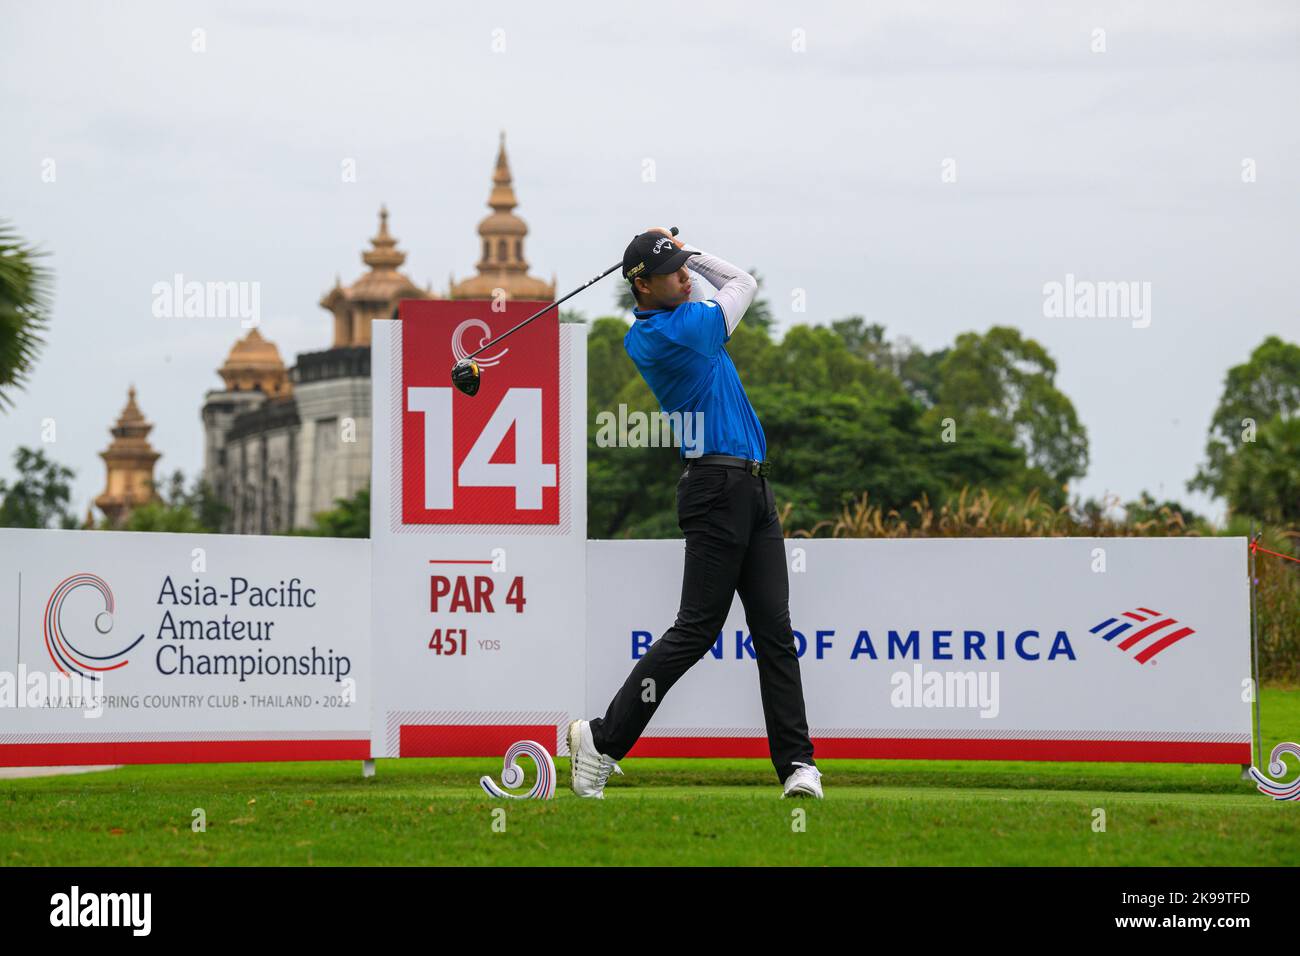 Chonburi, THAILAND. 27th October, 2022. Wenyi Ding of CHINA tees off at hole 14 (his 5th) during the 1st round of the 2022 Asia-Pacific Amateur Championship at Amata Spring Country Club, Chanburi, THAILAND. Credit: Jason Butler/Alamy Live News. Stock Photo